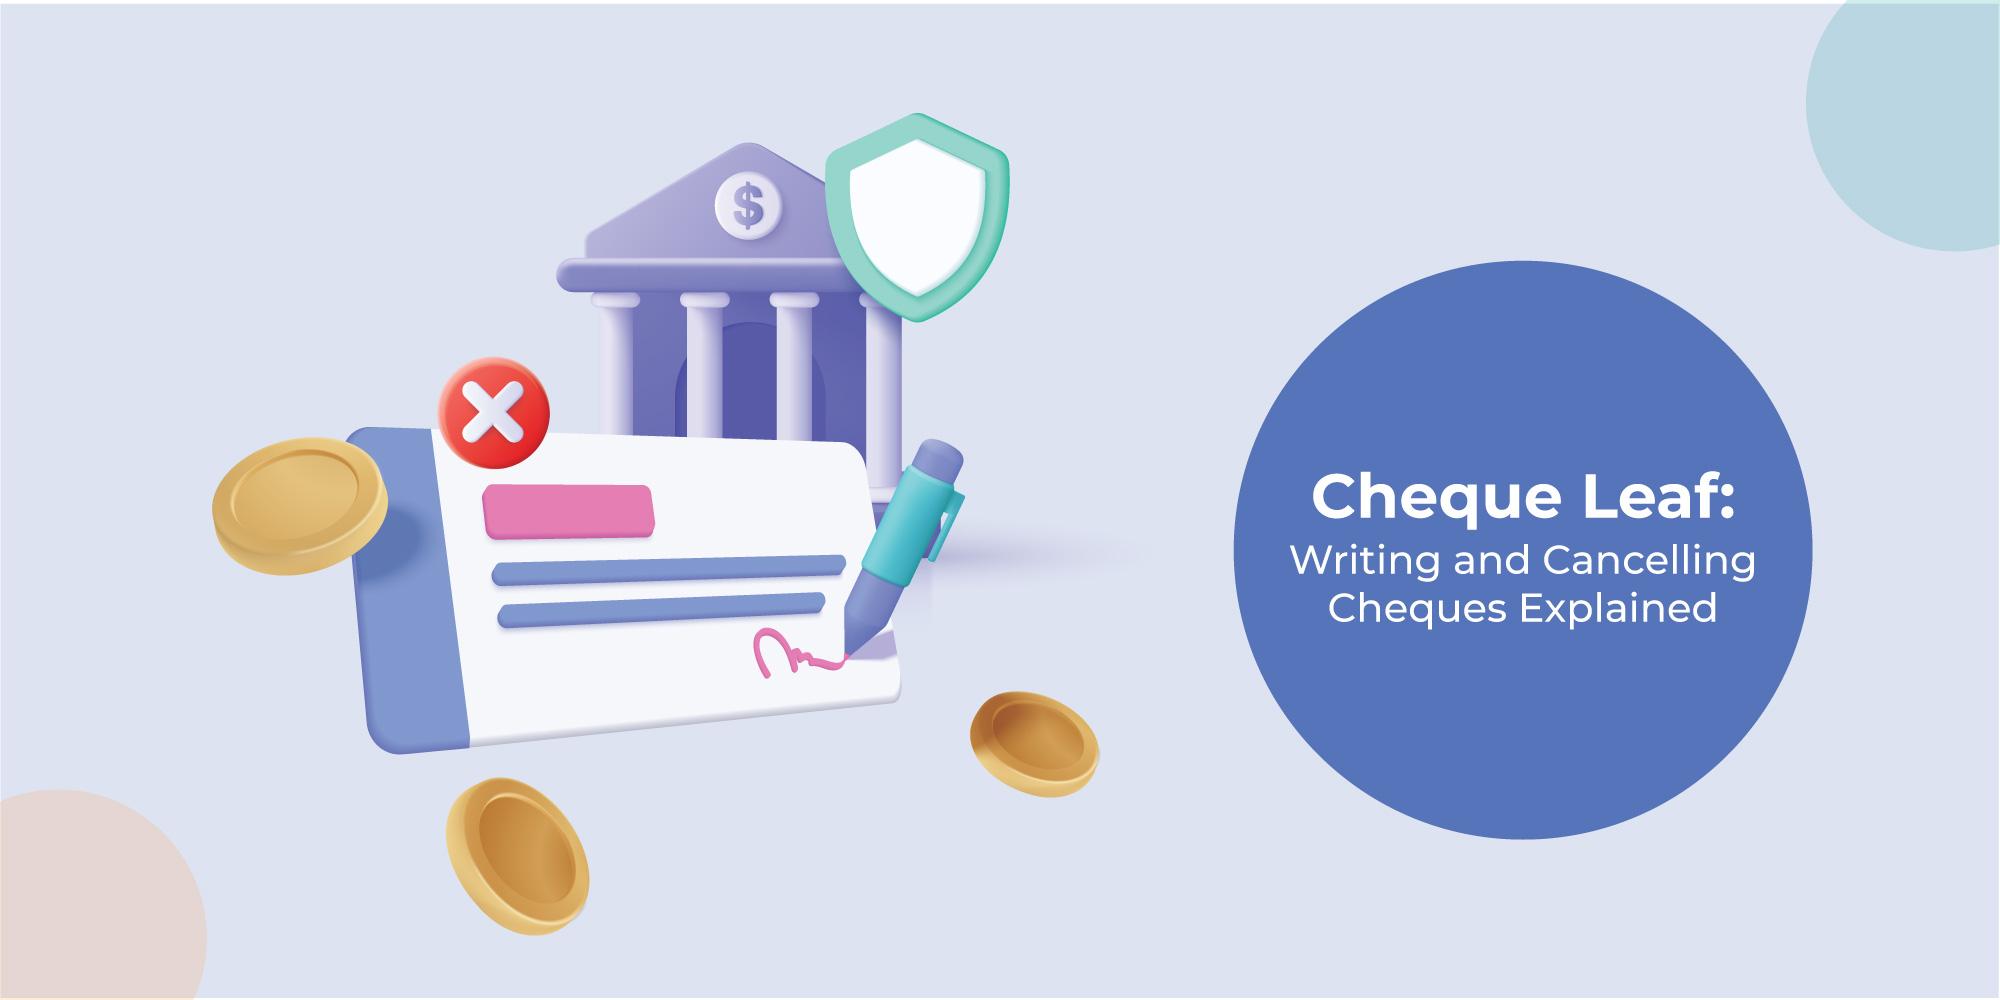 Cheque Leaf: 5 Top Facts You Need to Know